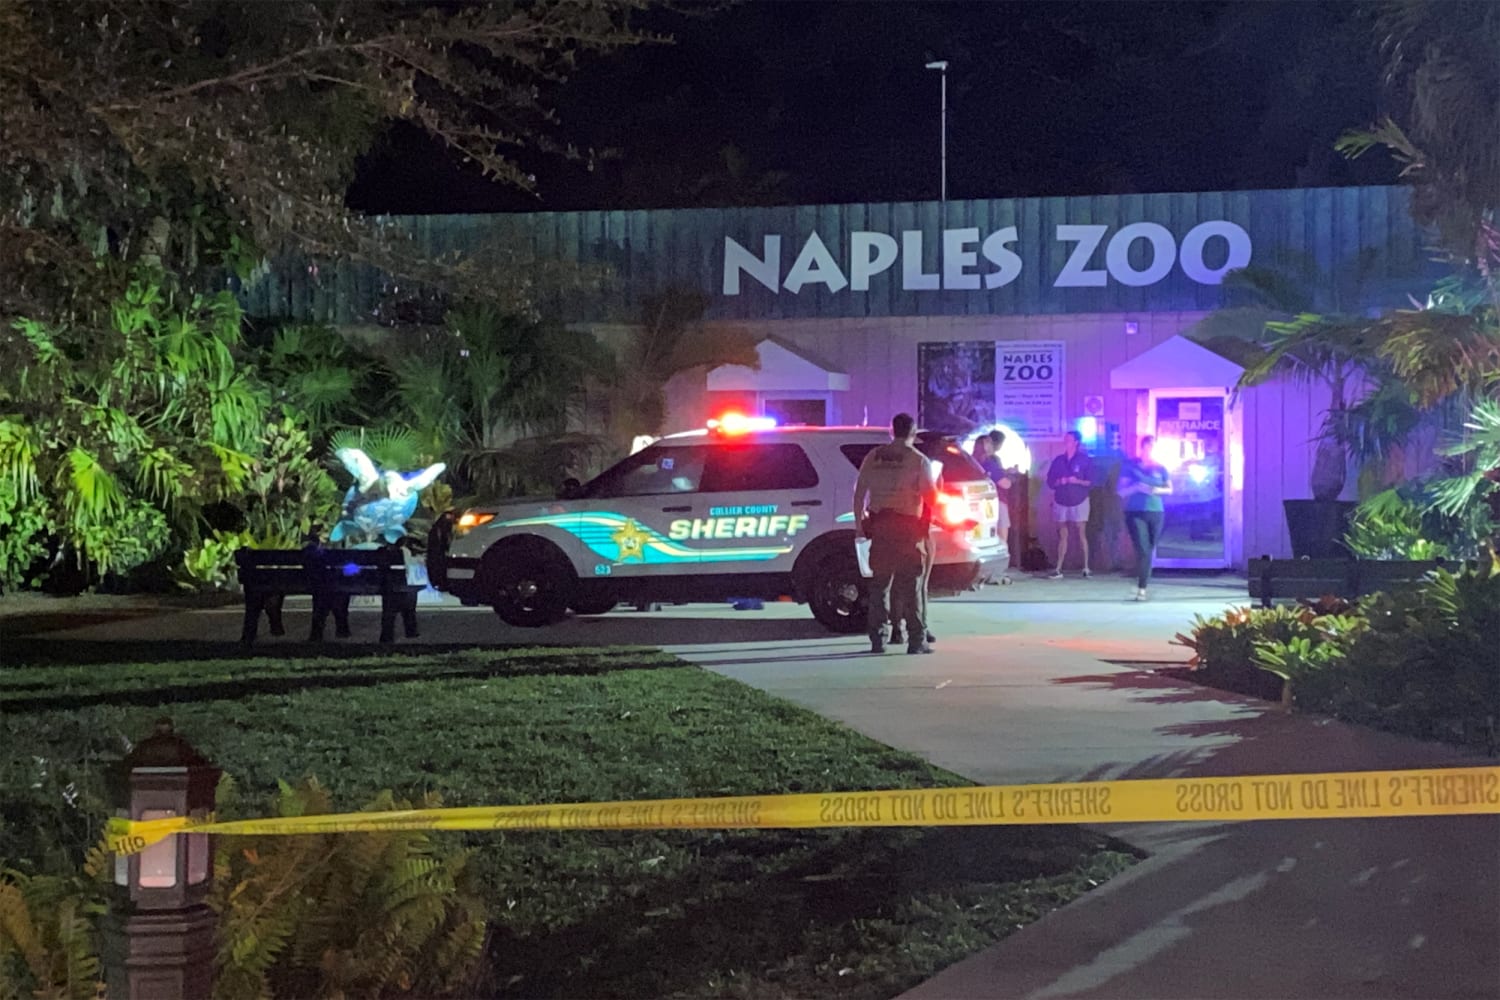 Tiger fatally shot after biting worker’s arm at Florida zoo, authorities say